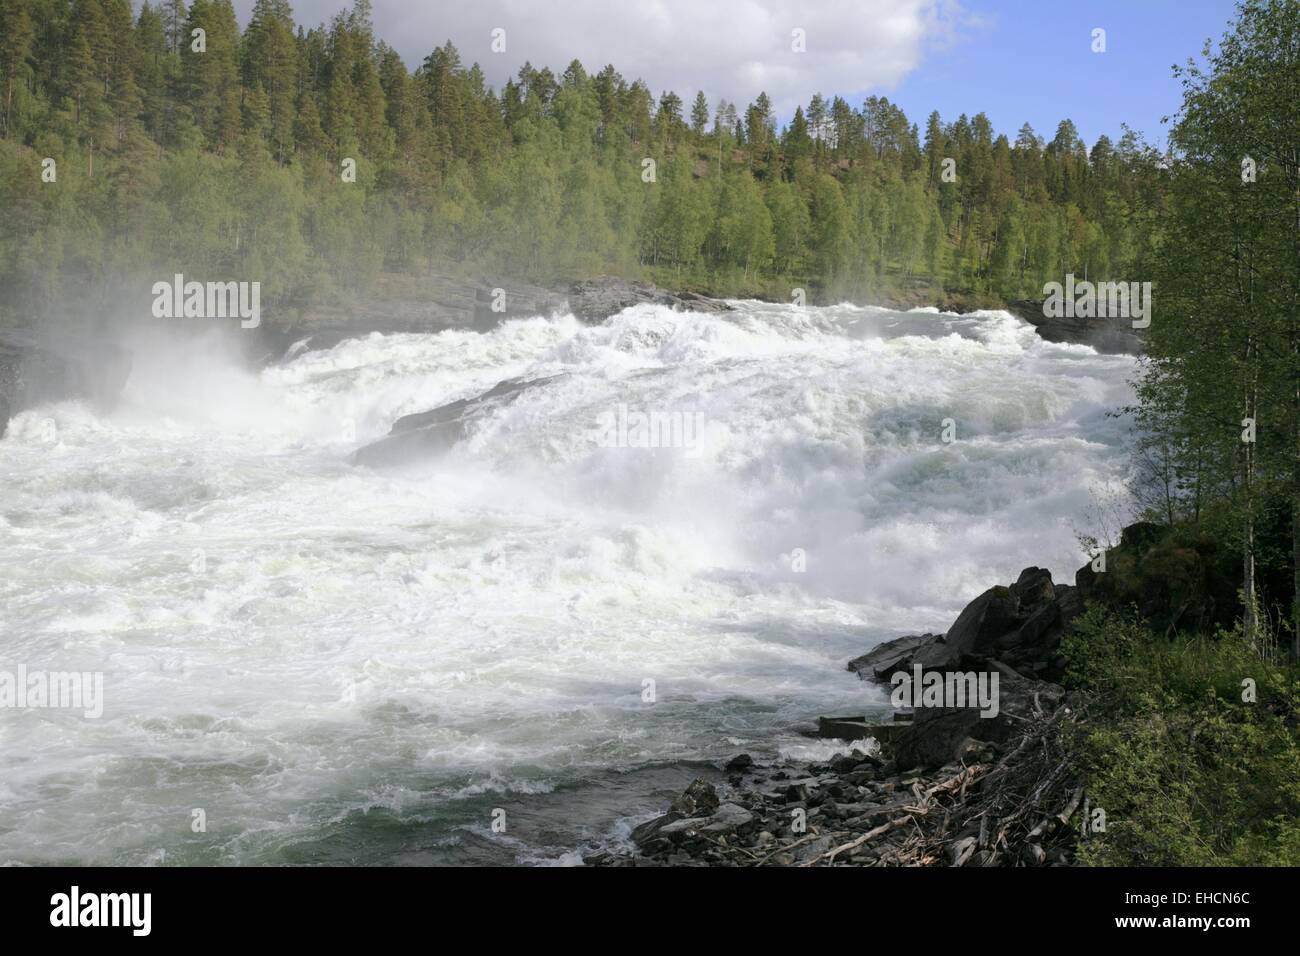 Waterfall in Northern Norway Stock Photo